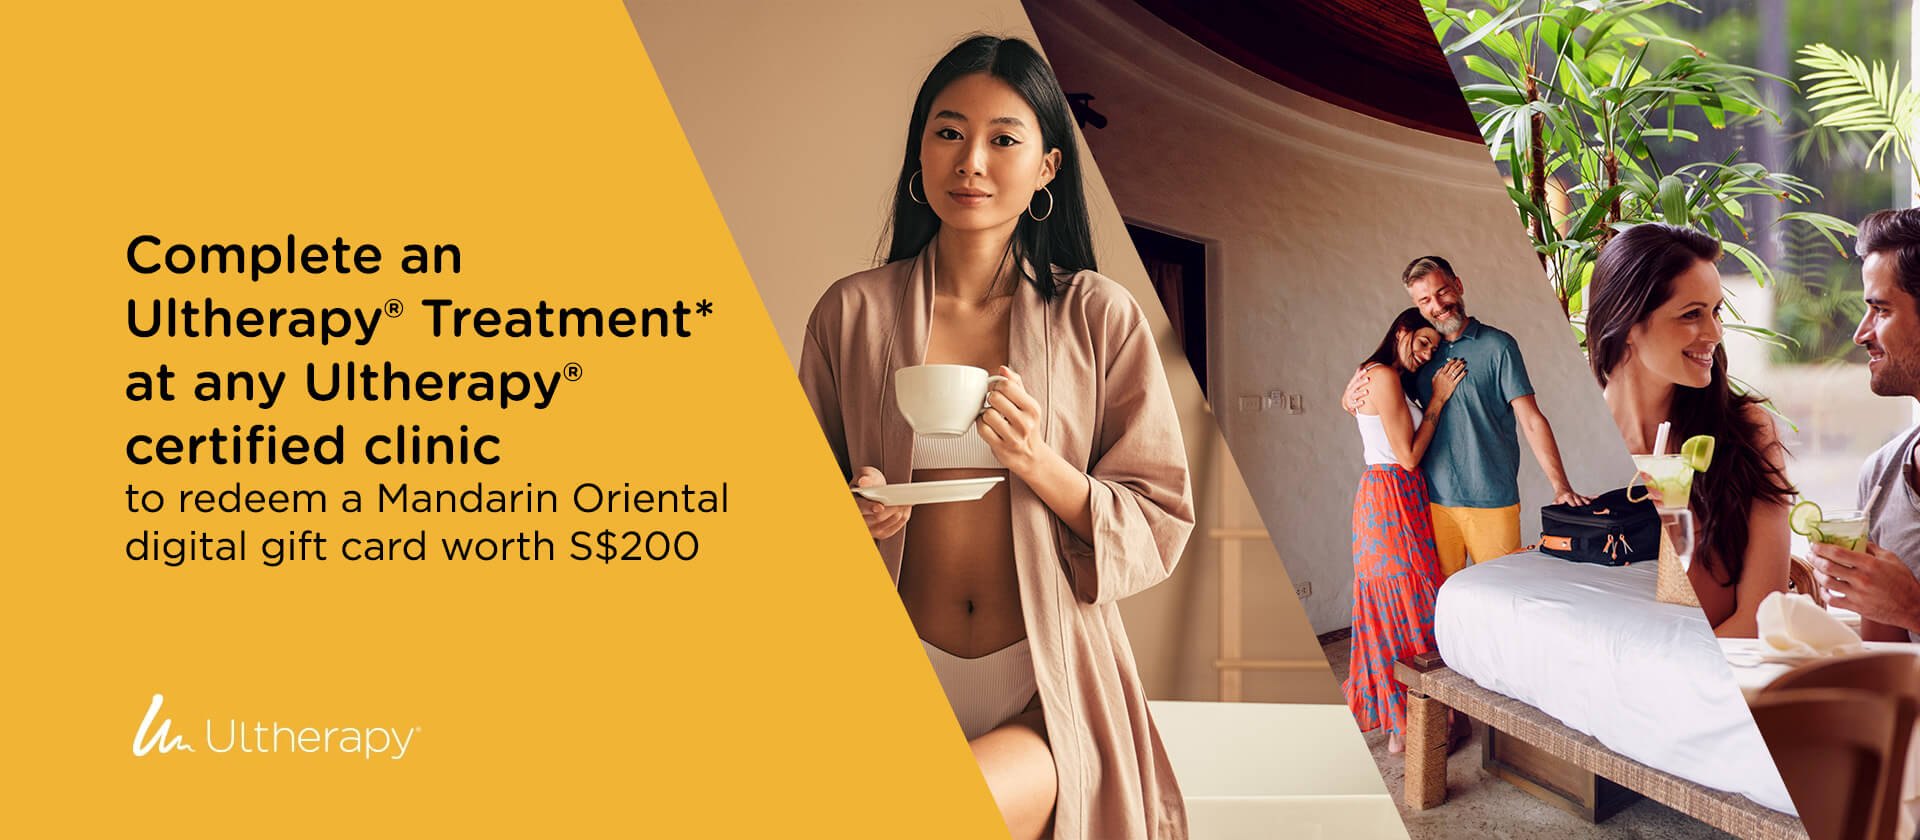 Complete an Ultherapy Treatment* at any Ultherapy certificed clinic to redeem a Mandarin Oriental digital gift card worth S$200